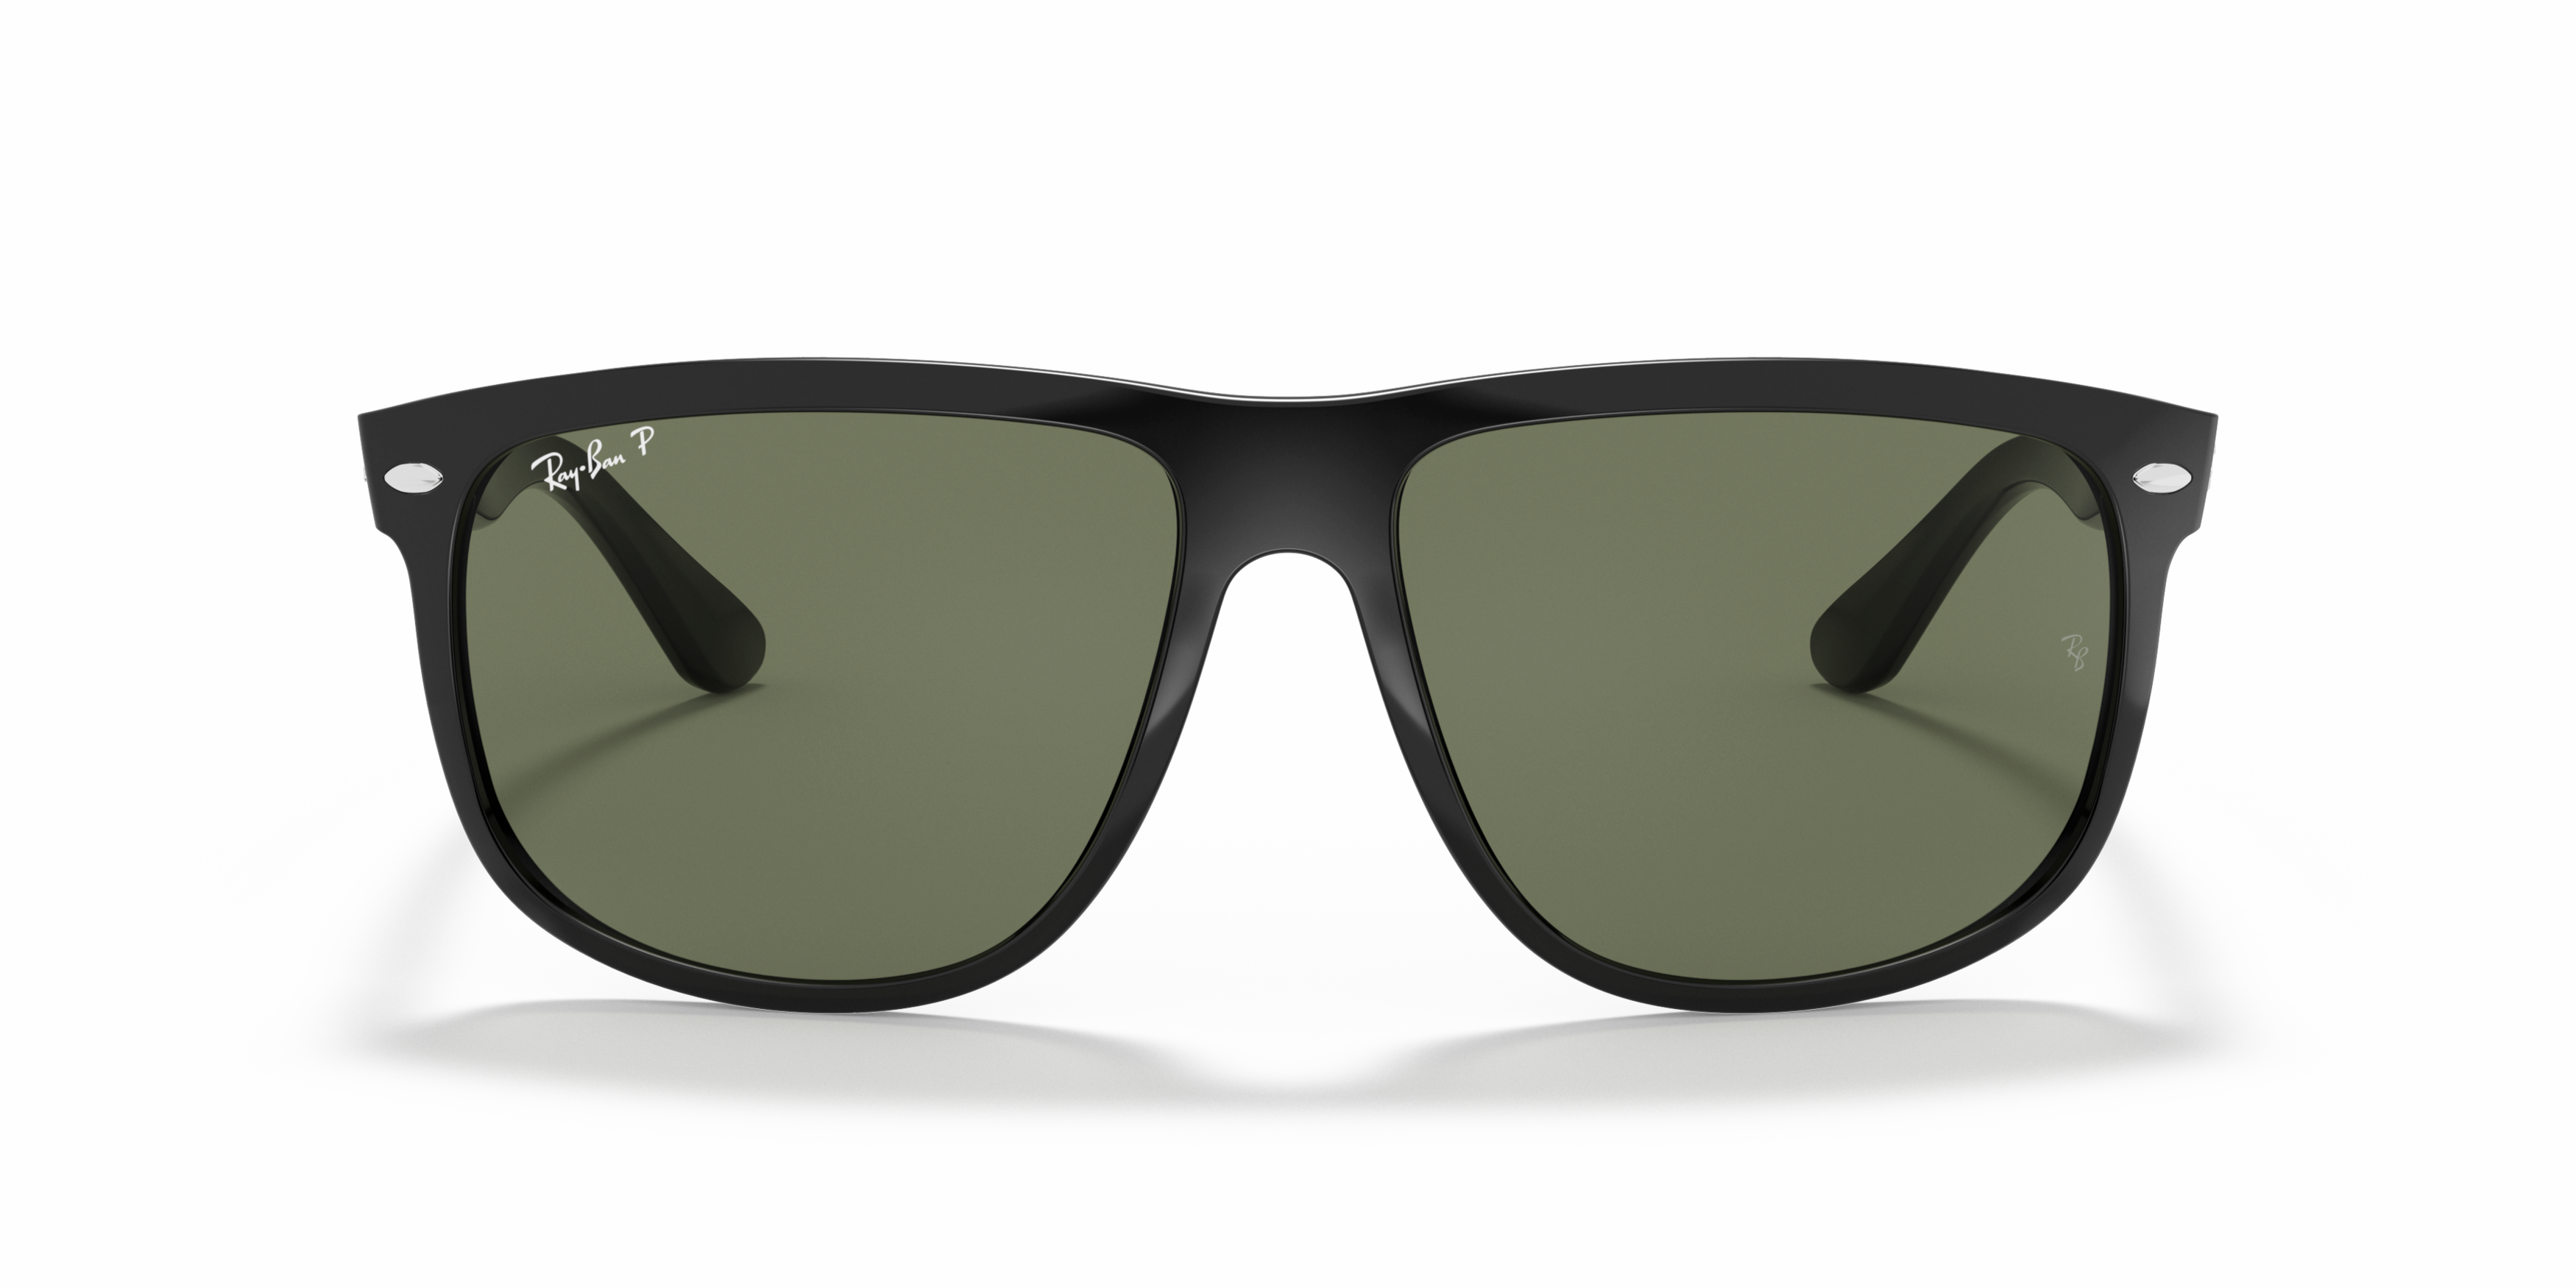 [products.image.front] Ray-Ban 0RB4147 601/58